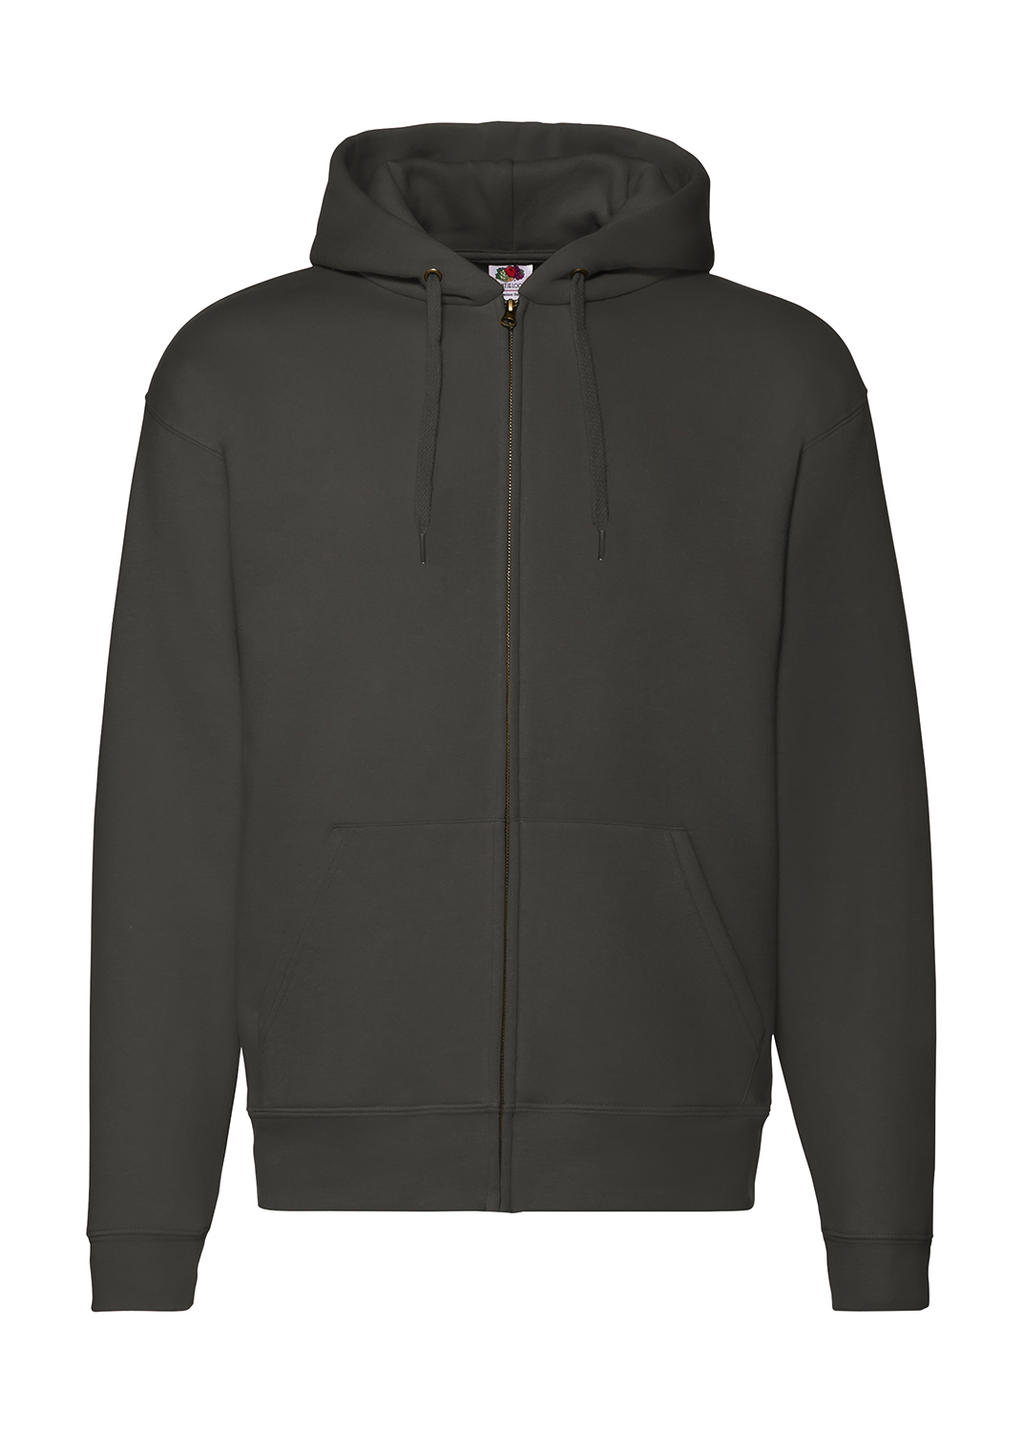  Premium Hooded Zip Sweat in Farbe Charcoal